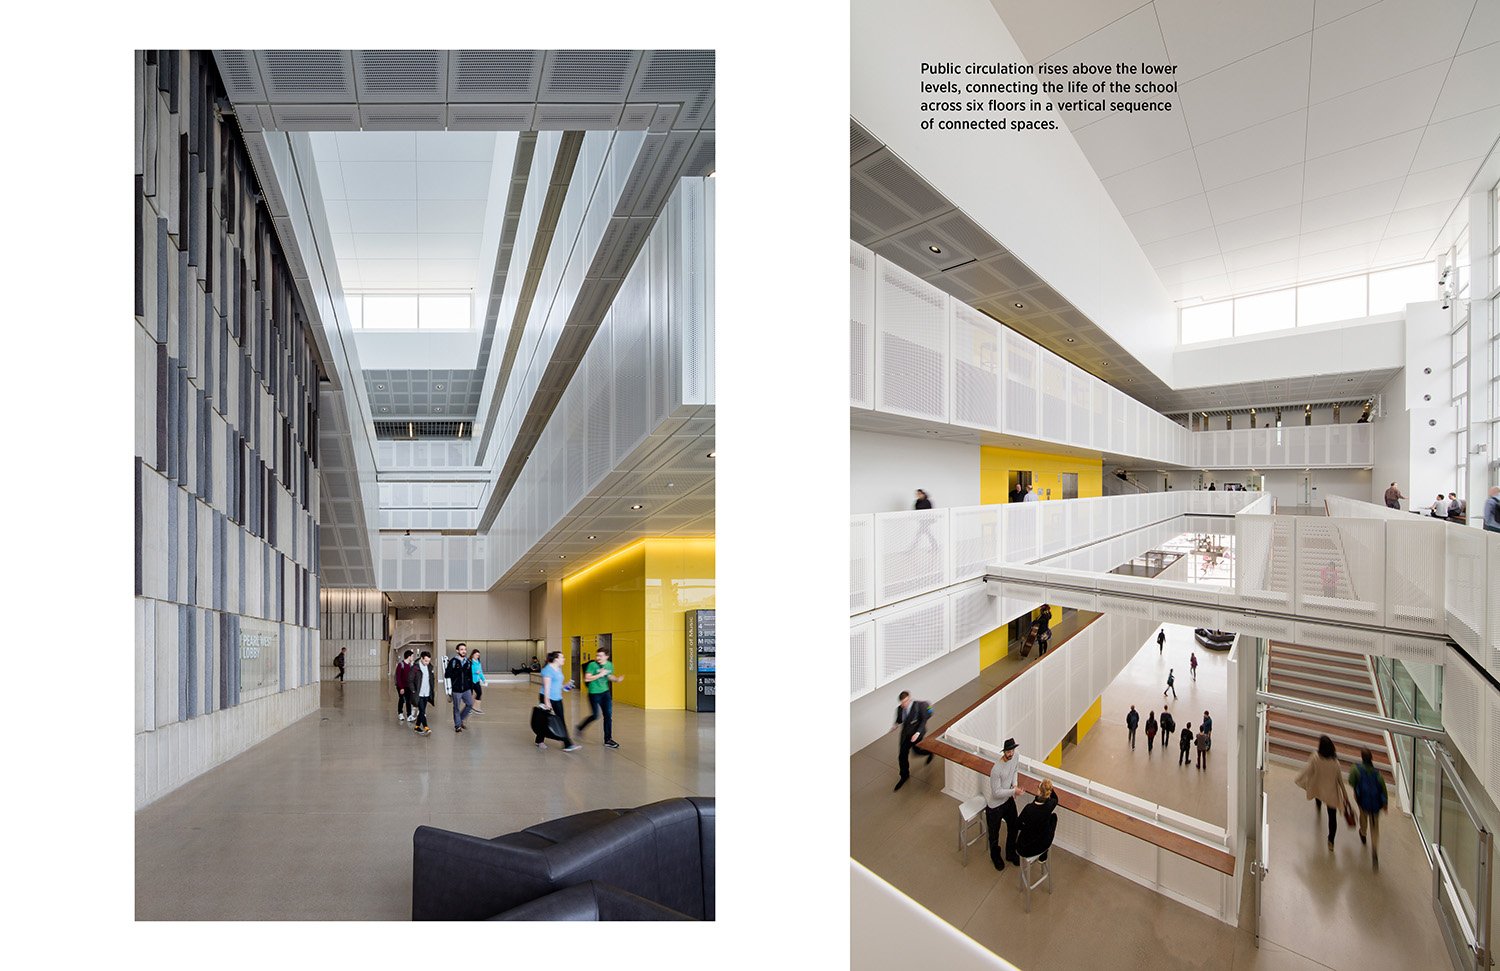 Public circulation rises above the lower levels, connecting the life of the school across six floors in a vertical sequence of connected spaces. | Tim Griffith